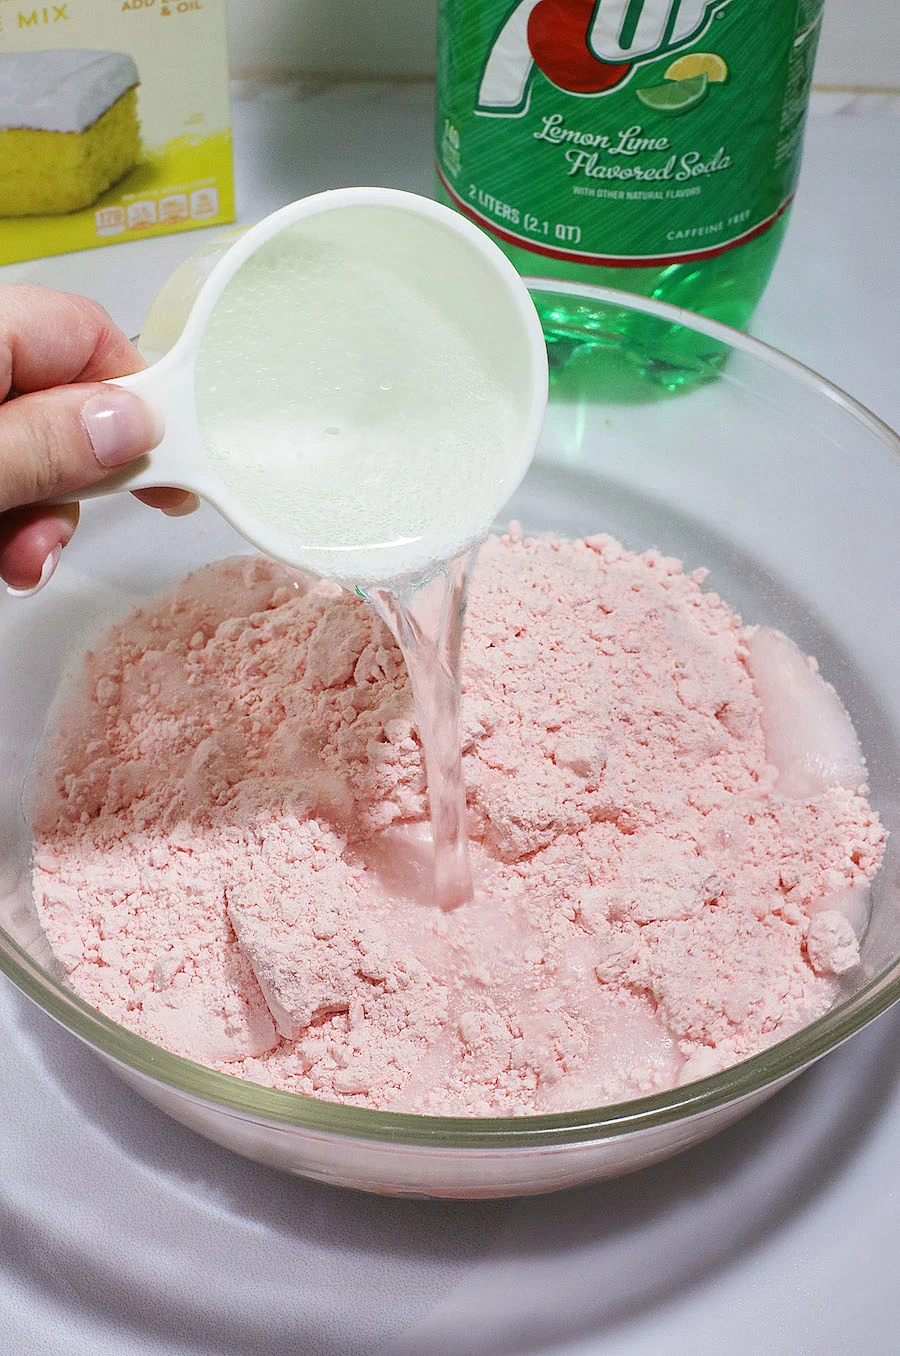 sprite being poured into strawberry cake mix bowl